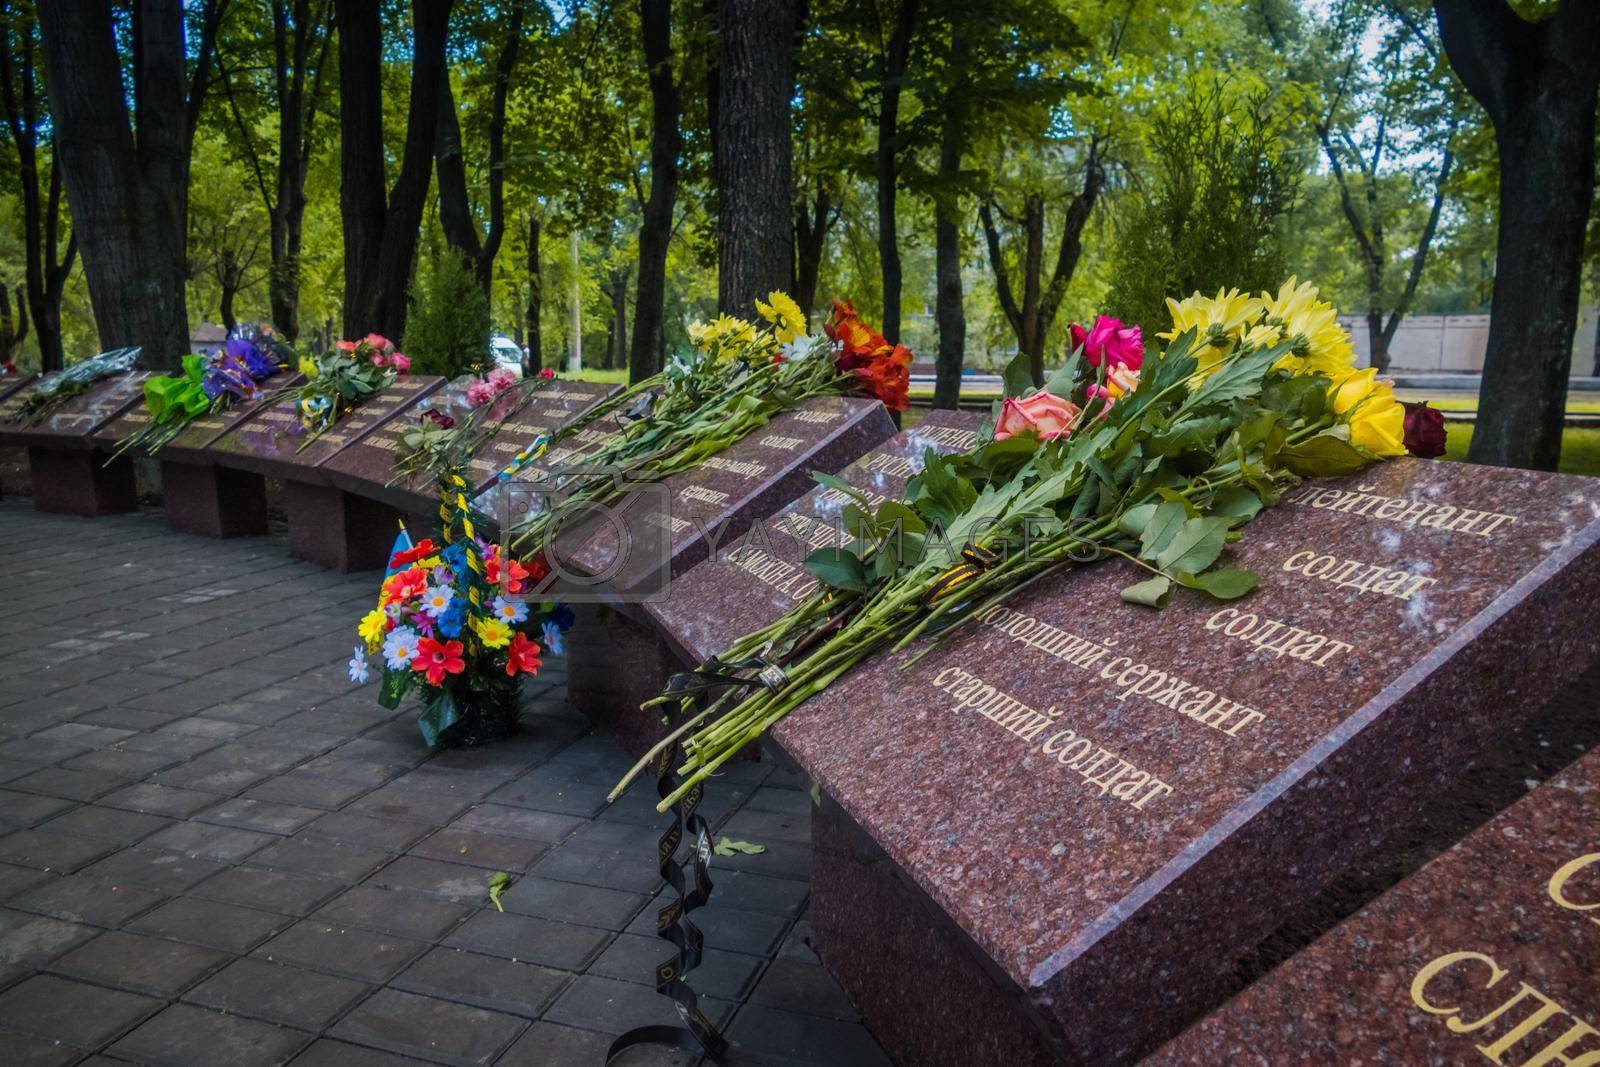 Krivoy Rog, Ukraine - may 18, 2020: A man with flowers near the memorial to fallen soldiers - defenders of Ukraine while honoring the memory of those killed in the battles for Debaltseve